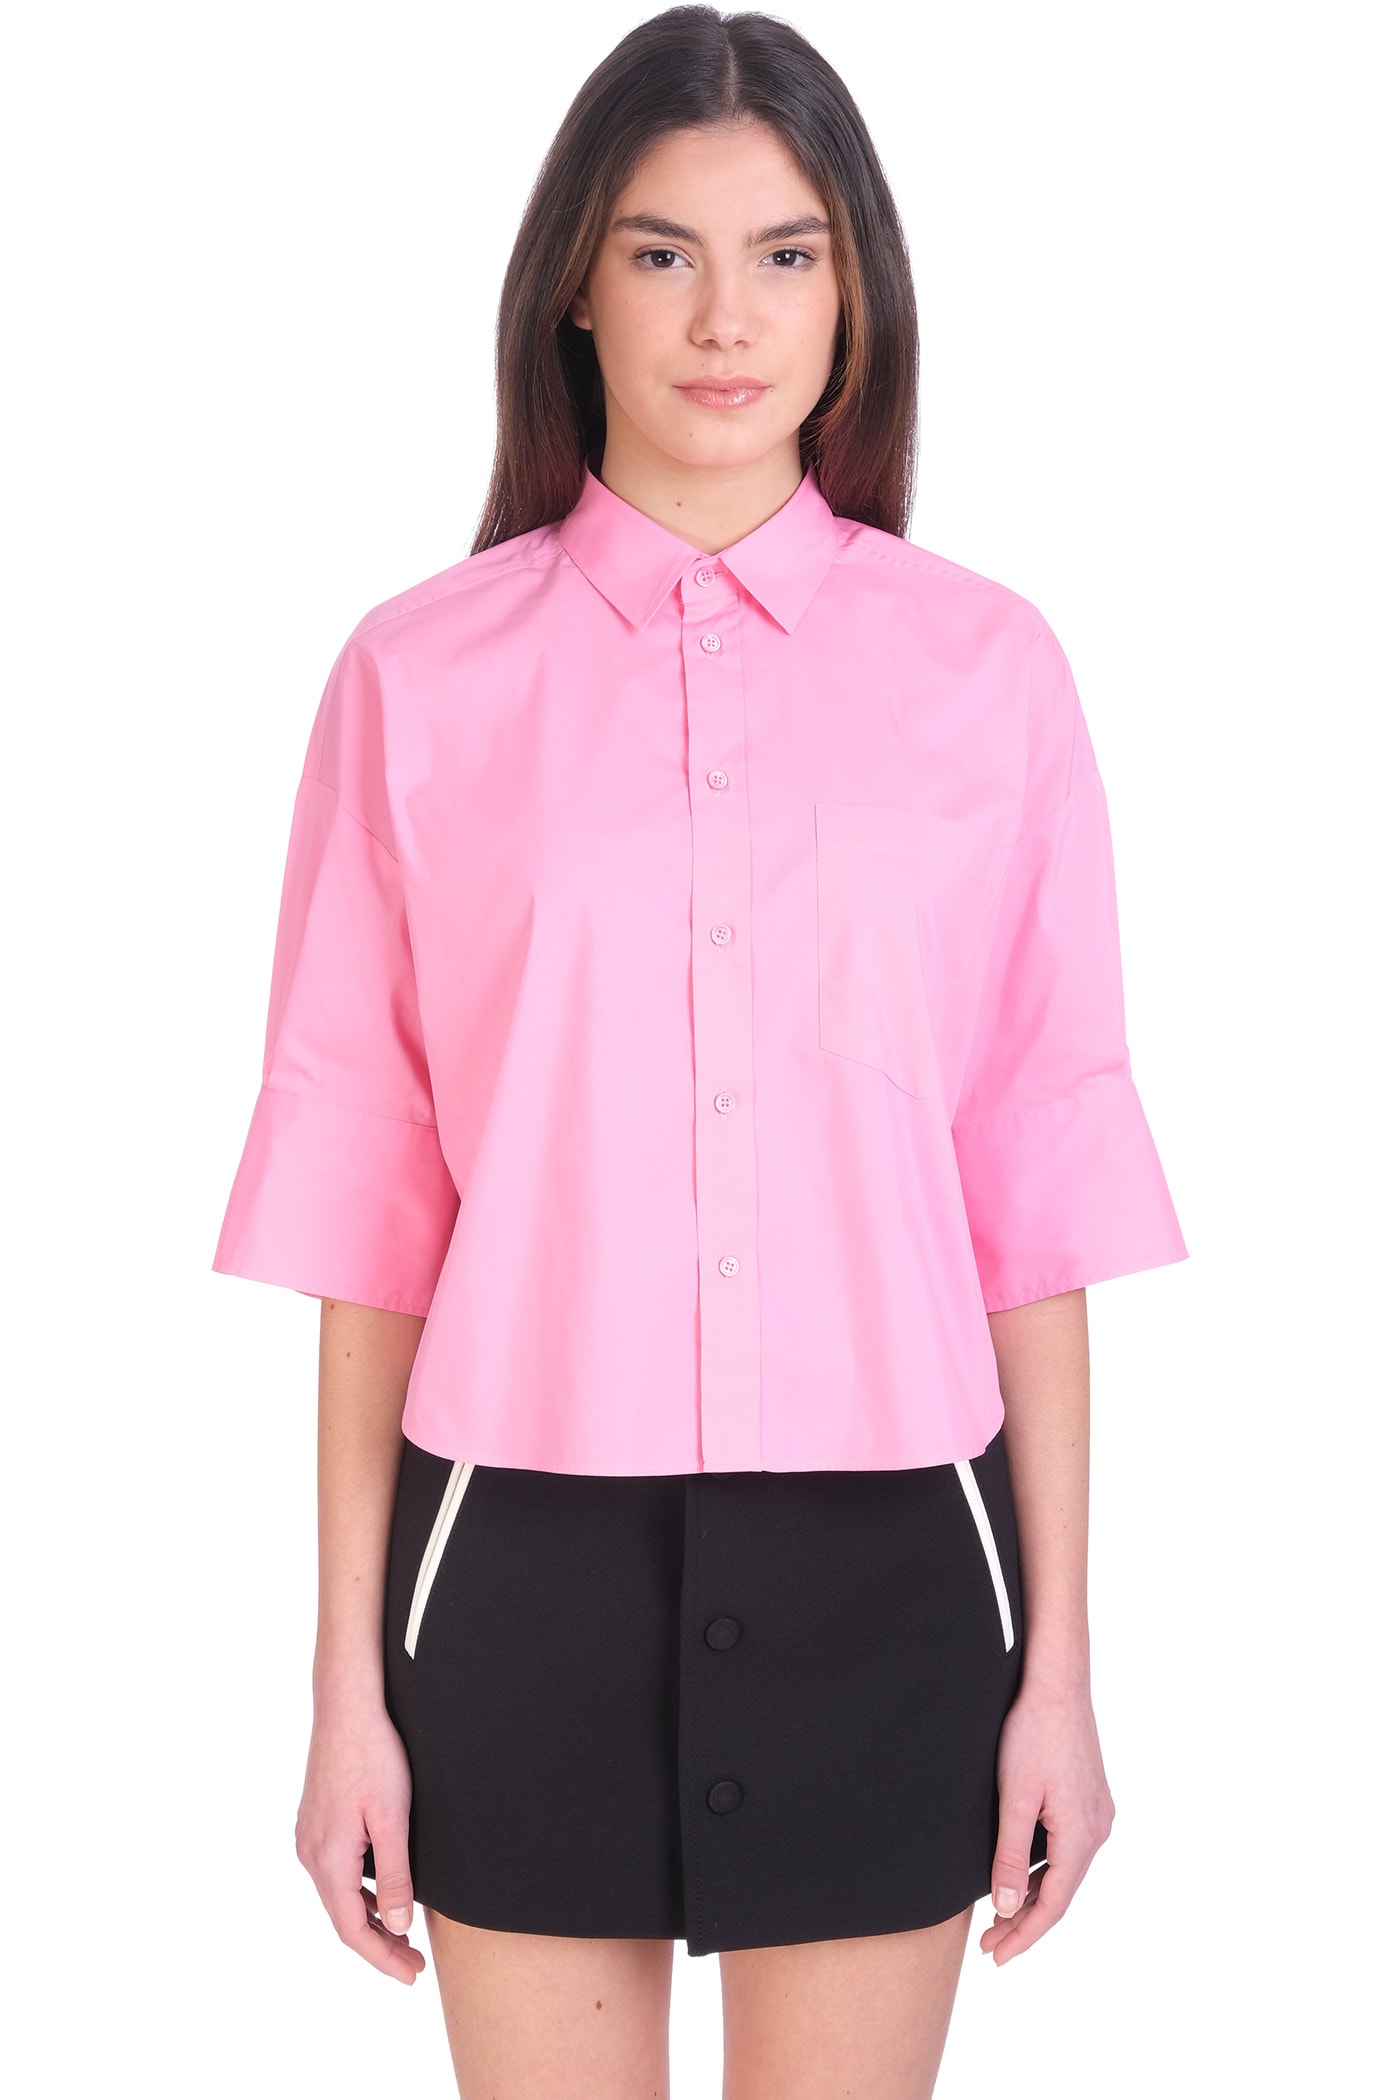 RED Valentino Shirt In Rose-pink Polyester